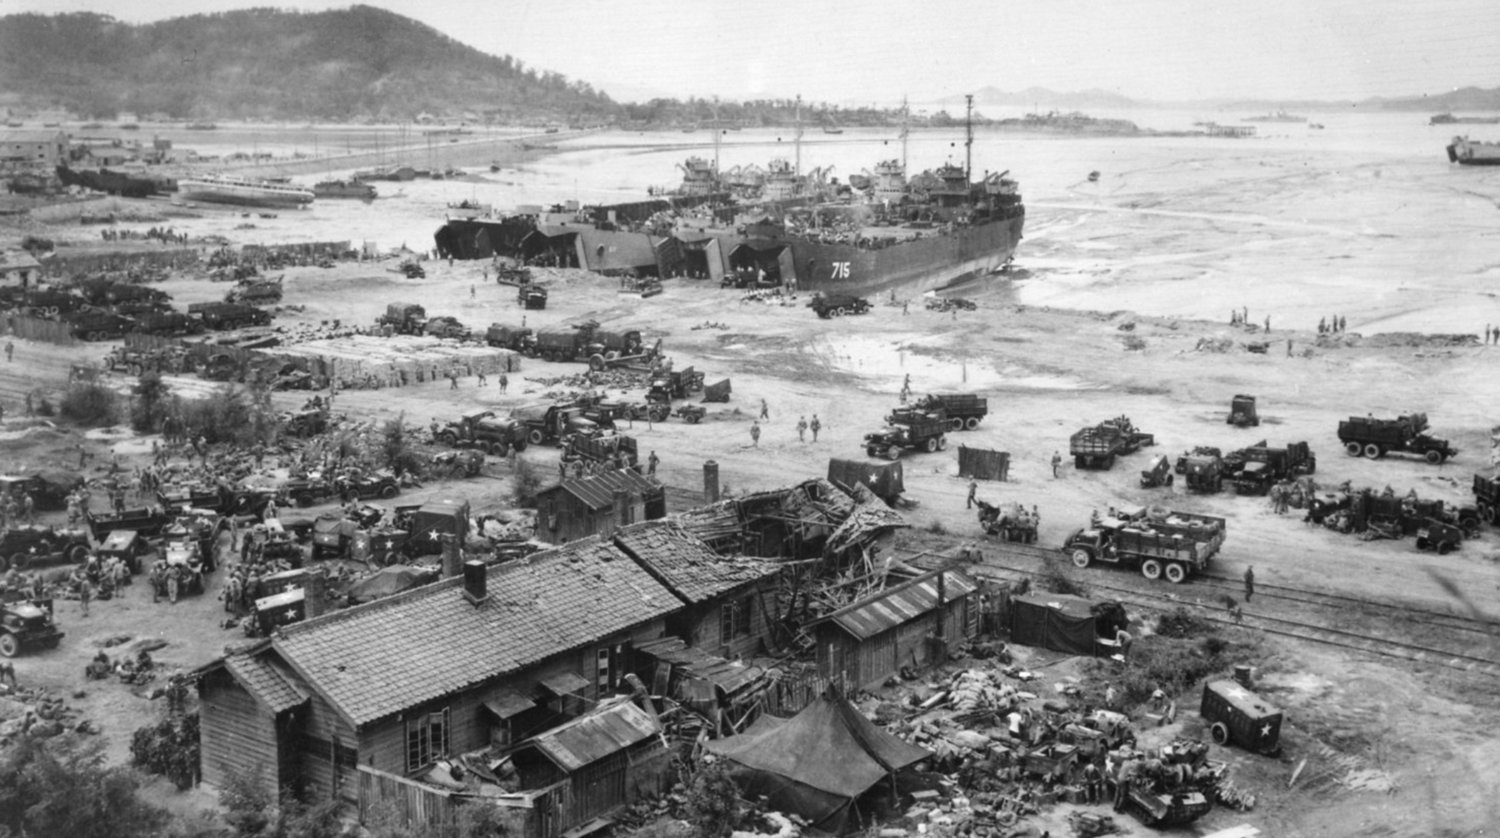 LSTs unloading at Inchon, 15 September 1950. American forces landed in Inchon harbor one day after the Battle of Inchon began.